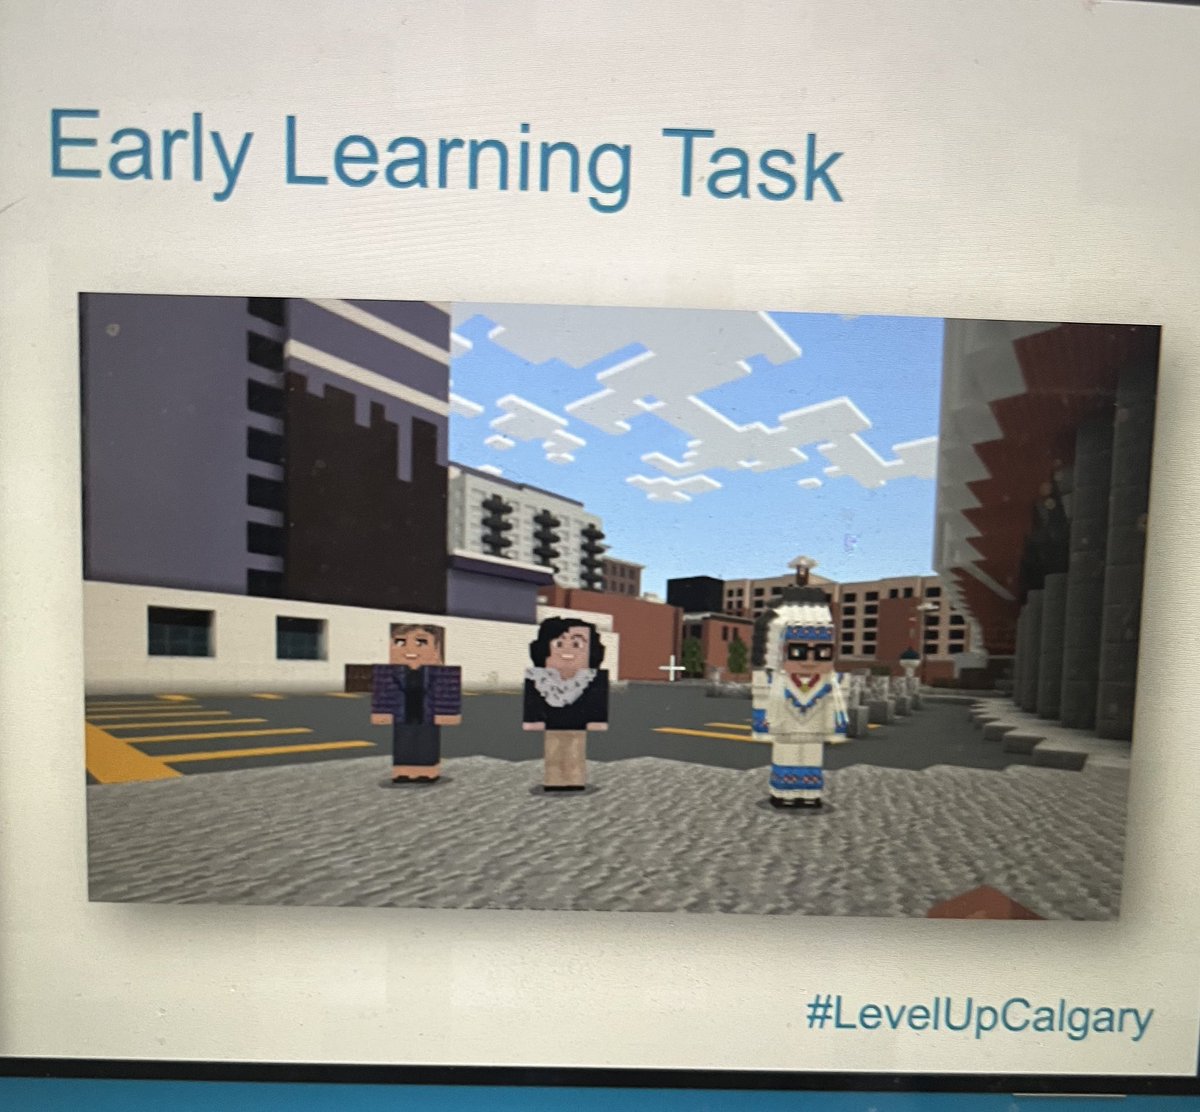 We are so excited that #LevelUpCalgary Season 2 has launched and our youngest learners have a chance to be part of the excitement! We’ve collaborated with some pretty inspiring people including @JyotiGondek @Indigenous_cbe @KidsCanPress @calgarylibrary and more! #WeAreCBE